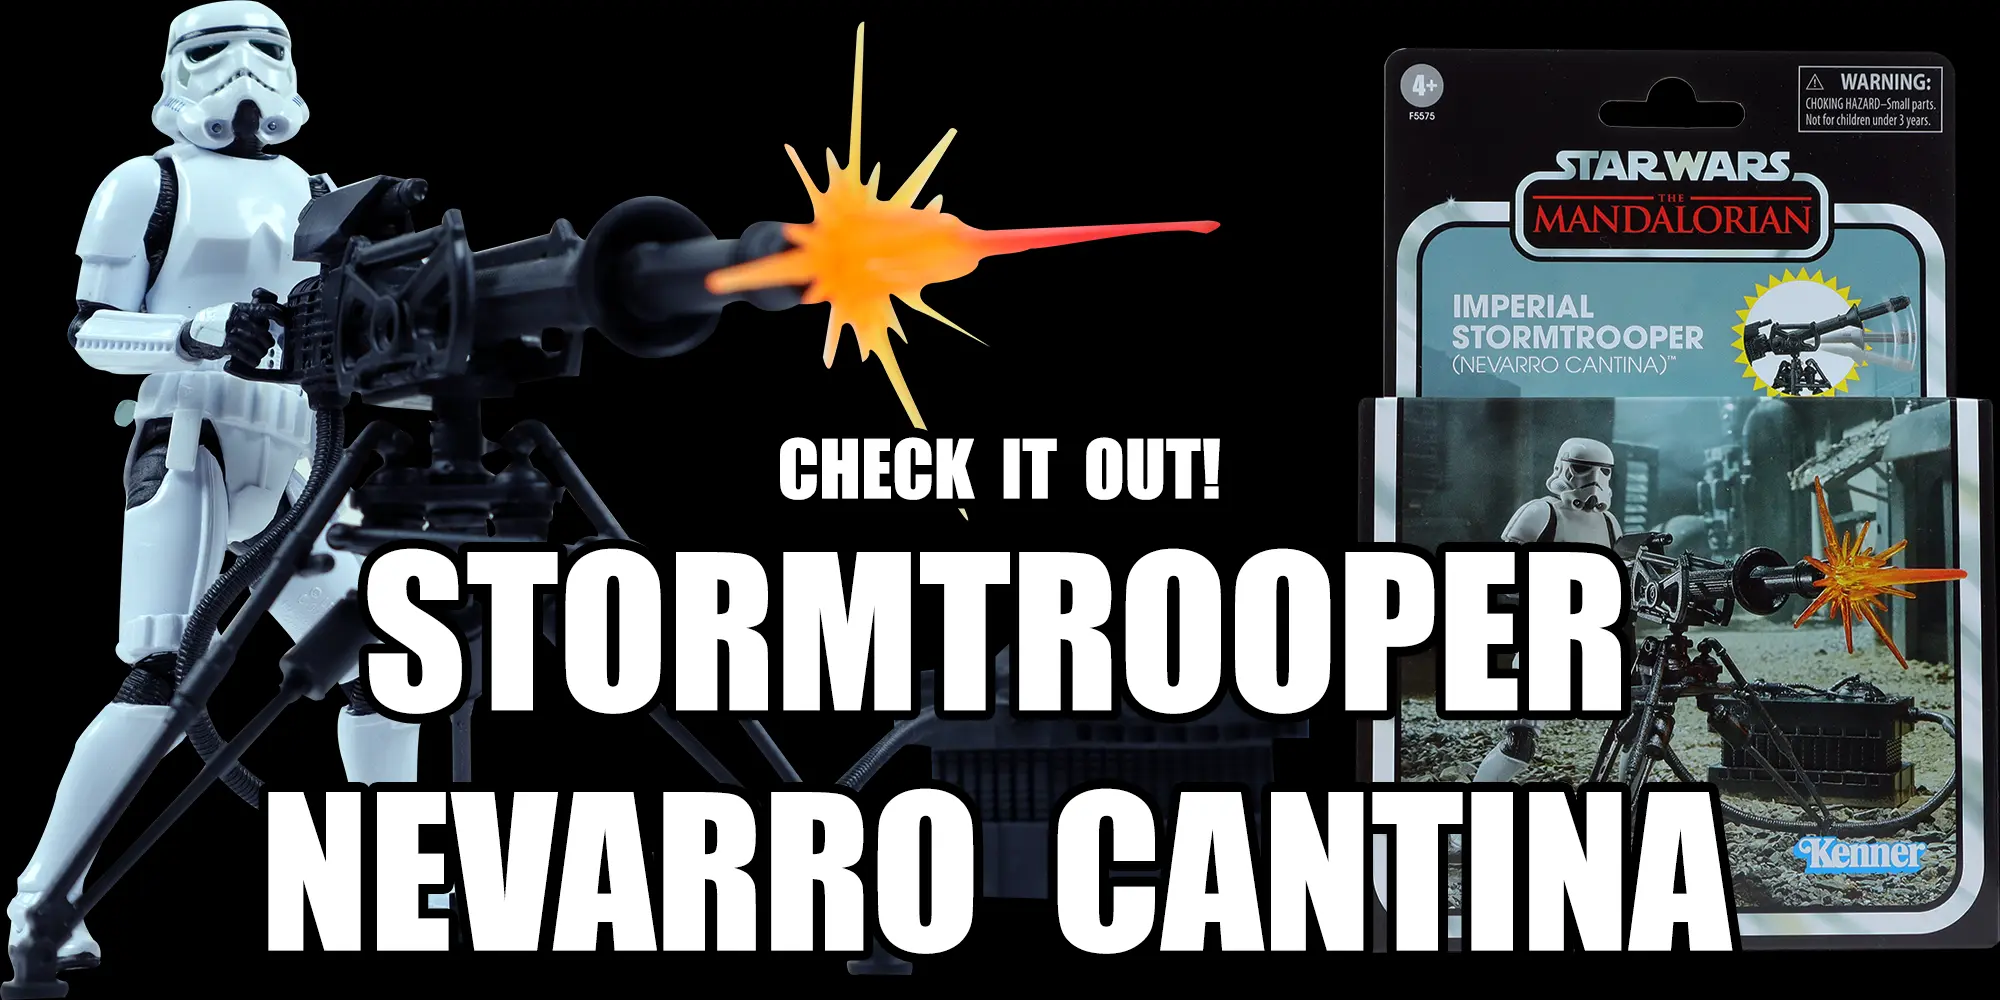 TVC Stormtrooper (Nevarro Cantina) Archived - Take A Look!